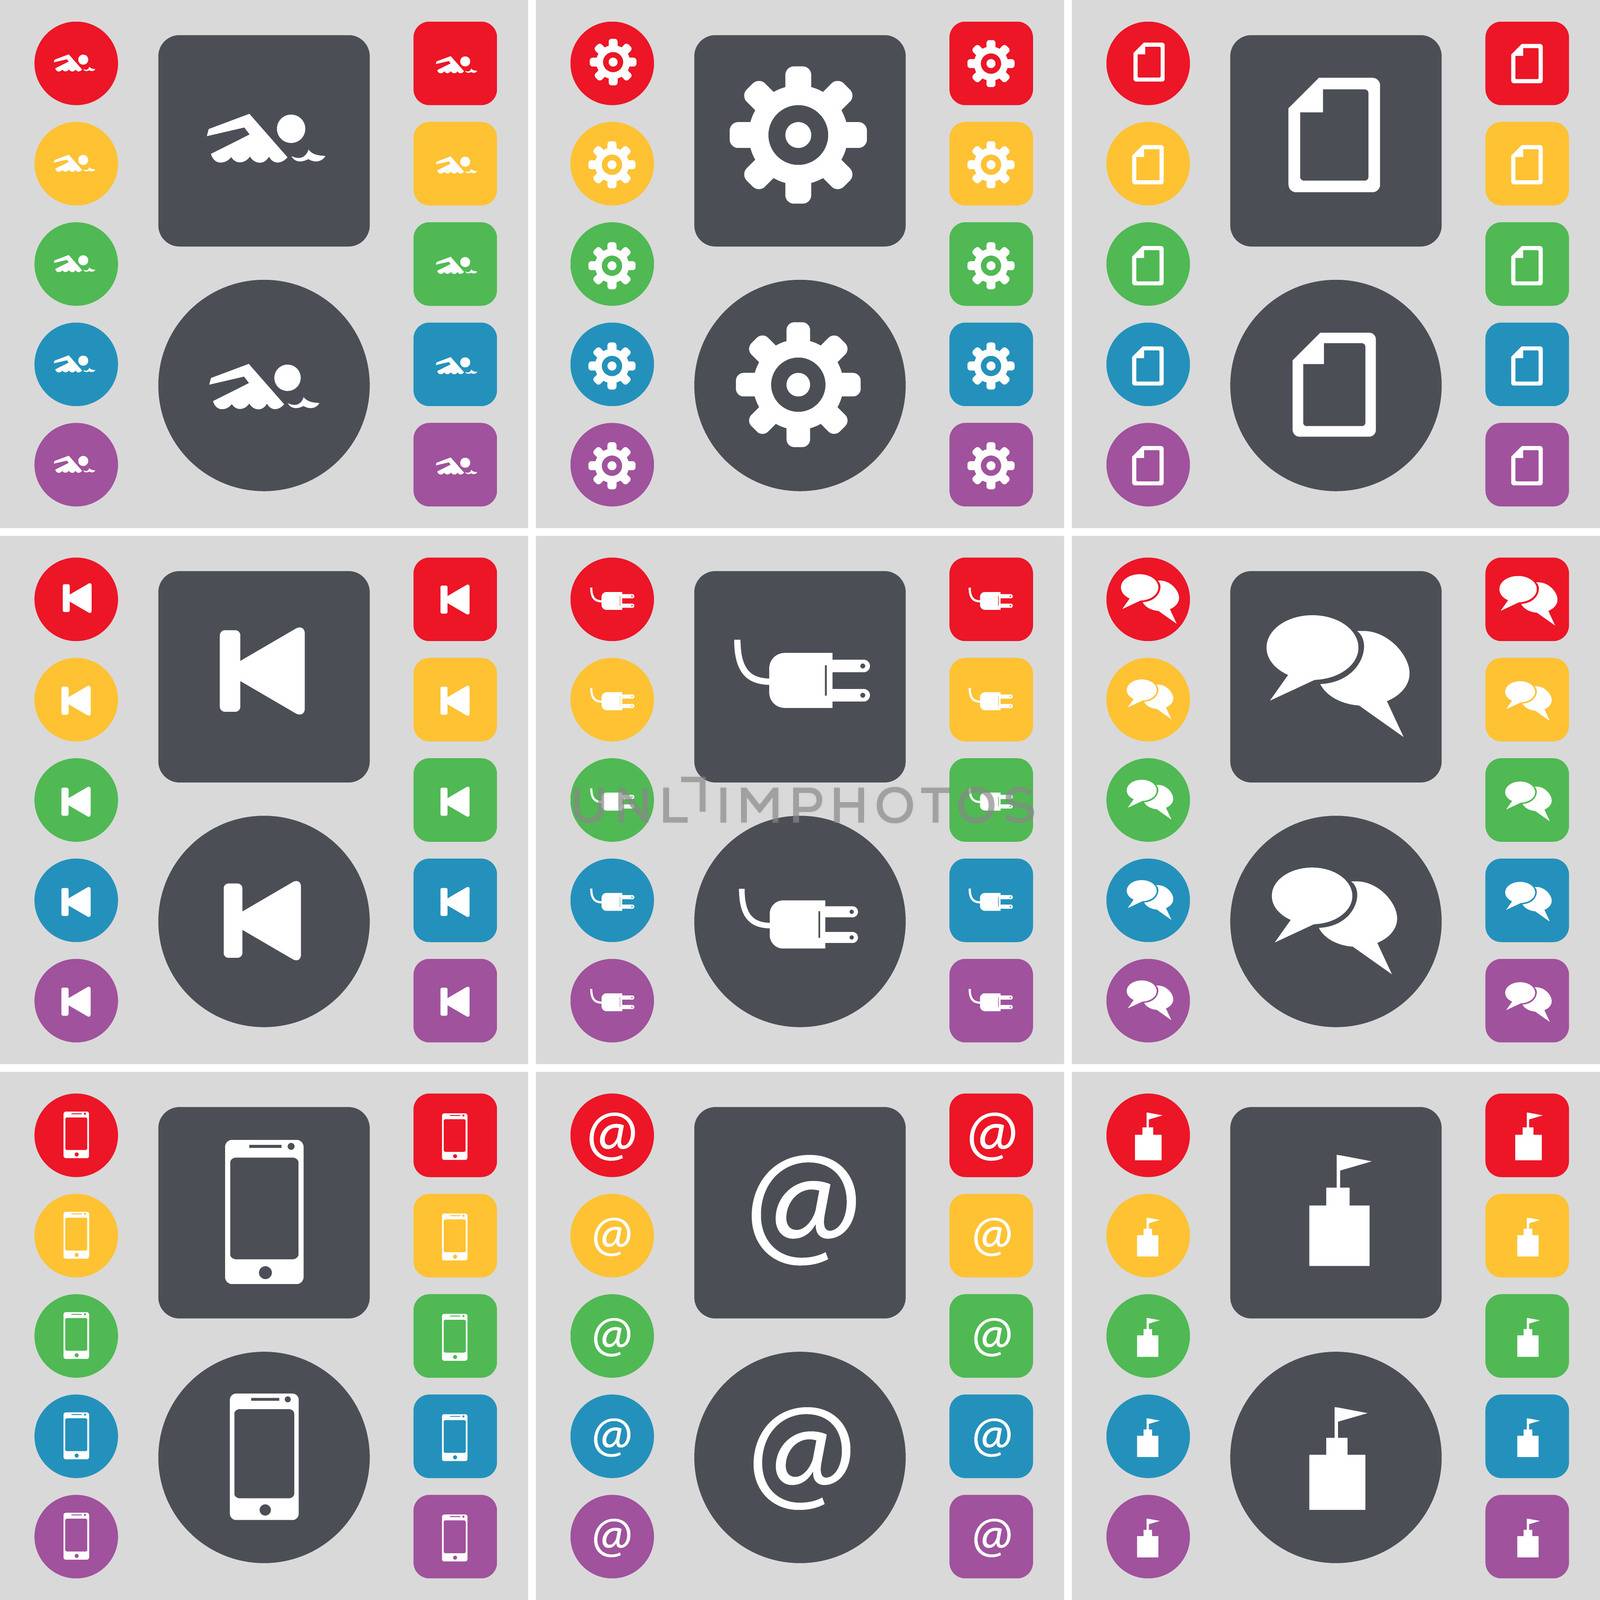 Swimmer, Gear, File, Media skip, Socket, Chat, Smartphone, Mail, Flag tower icon symbol. A large set of flat, colored buttons for your design. illustration